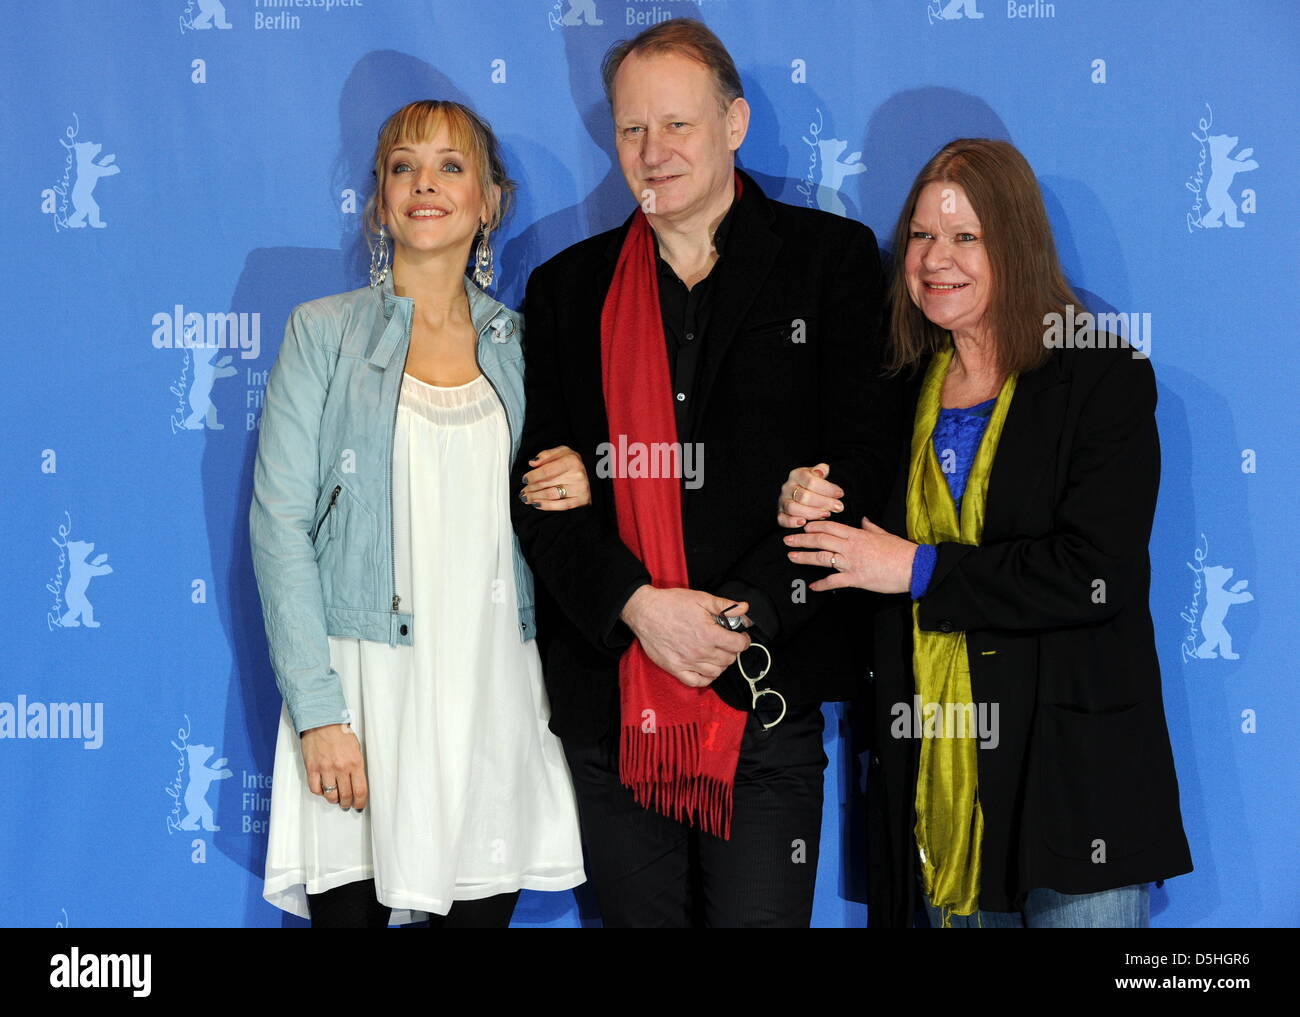 Actors Jannike Kruse Jatog (L-R), Stellan Skarsgard (Sweden) and Jorunn Kjellsby (Norway) attend the photocall for the film 'A Somewhat Gentle Man' running in competition during the 60th Berlinale International Film Festival in Berlin, Germany, Monday, 15 February 2010. The festival runs until 21 Febuary 2010. Photo: Tim Brakemeier dpa/lbn  +++(c) dpa - Bildfunk+++ Stock Photo